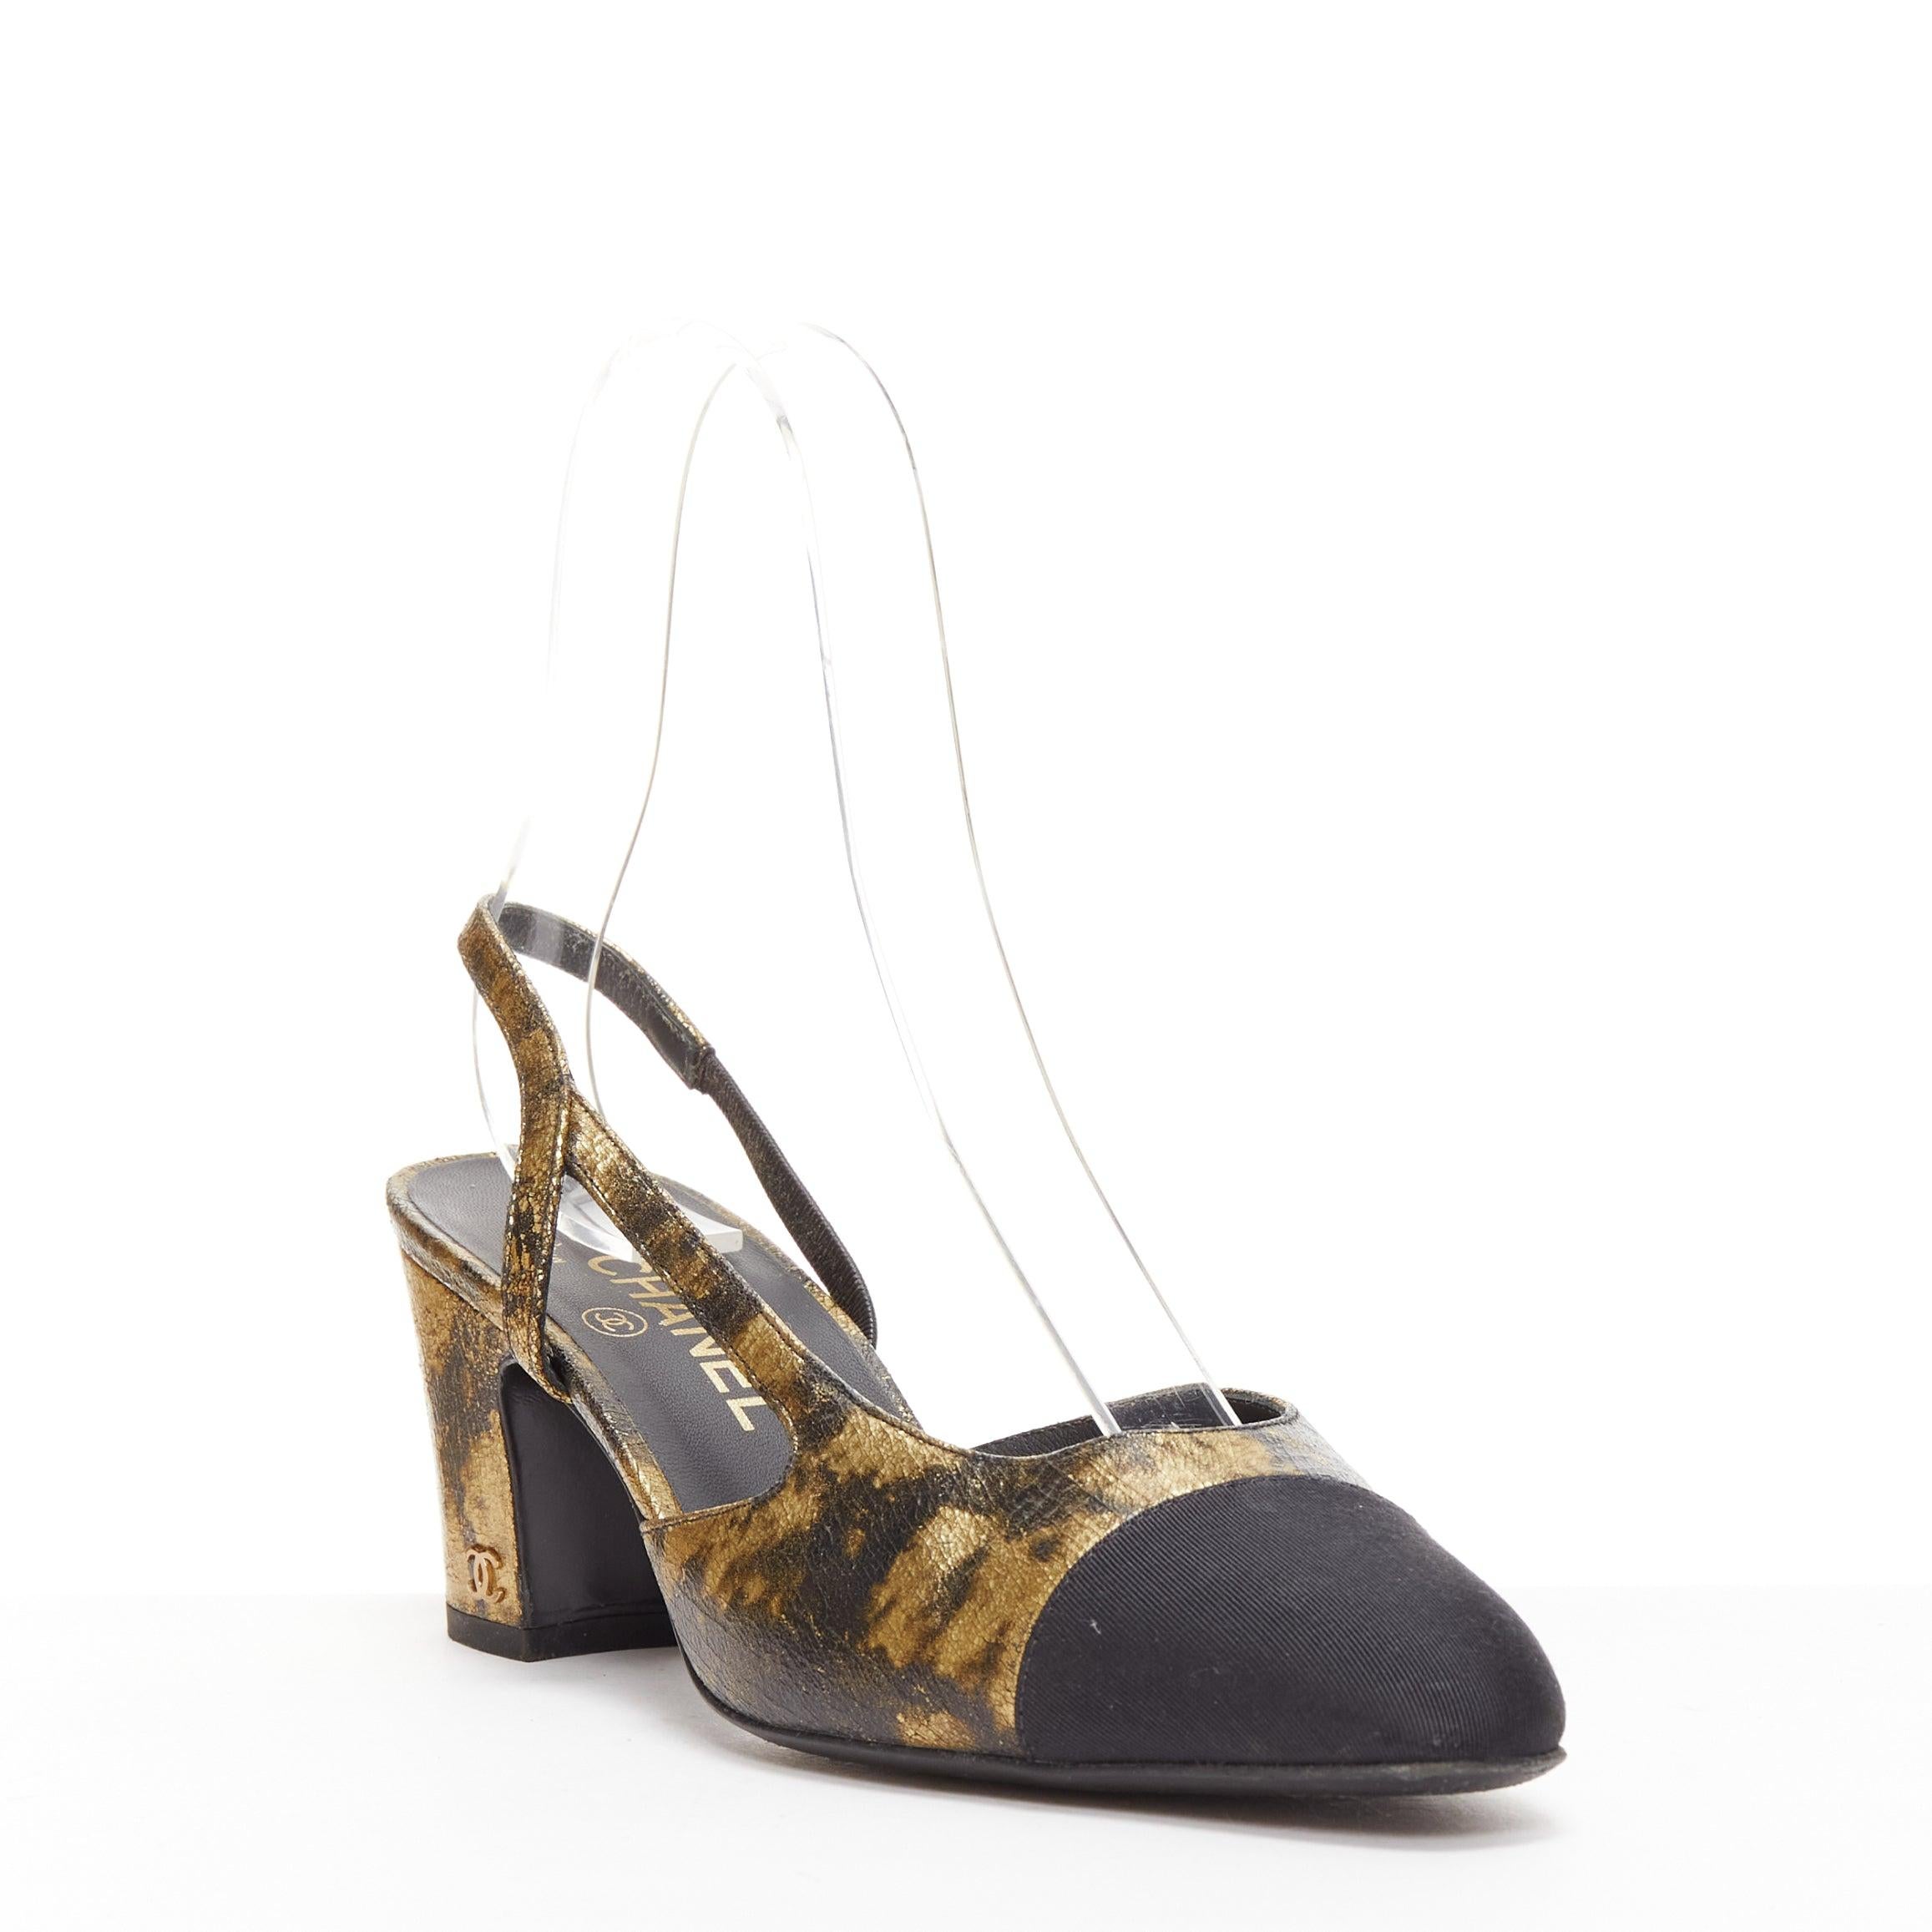 CHANEL gold black calfskinleather CC toe cap sling kitten pumps EU38
Reference: TGAS/D01132
Brand: Chanel
Designer: Karl Lagerfeld
Model: 2018-19
Material: Leather, Fabric
Color: Gold, Black
Pattern: Solid
Closure: Slip On
Lining: Black